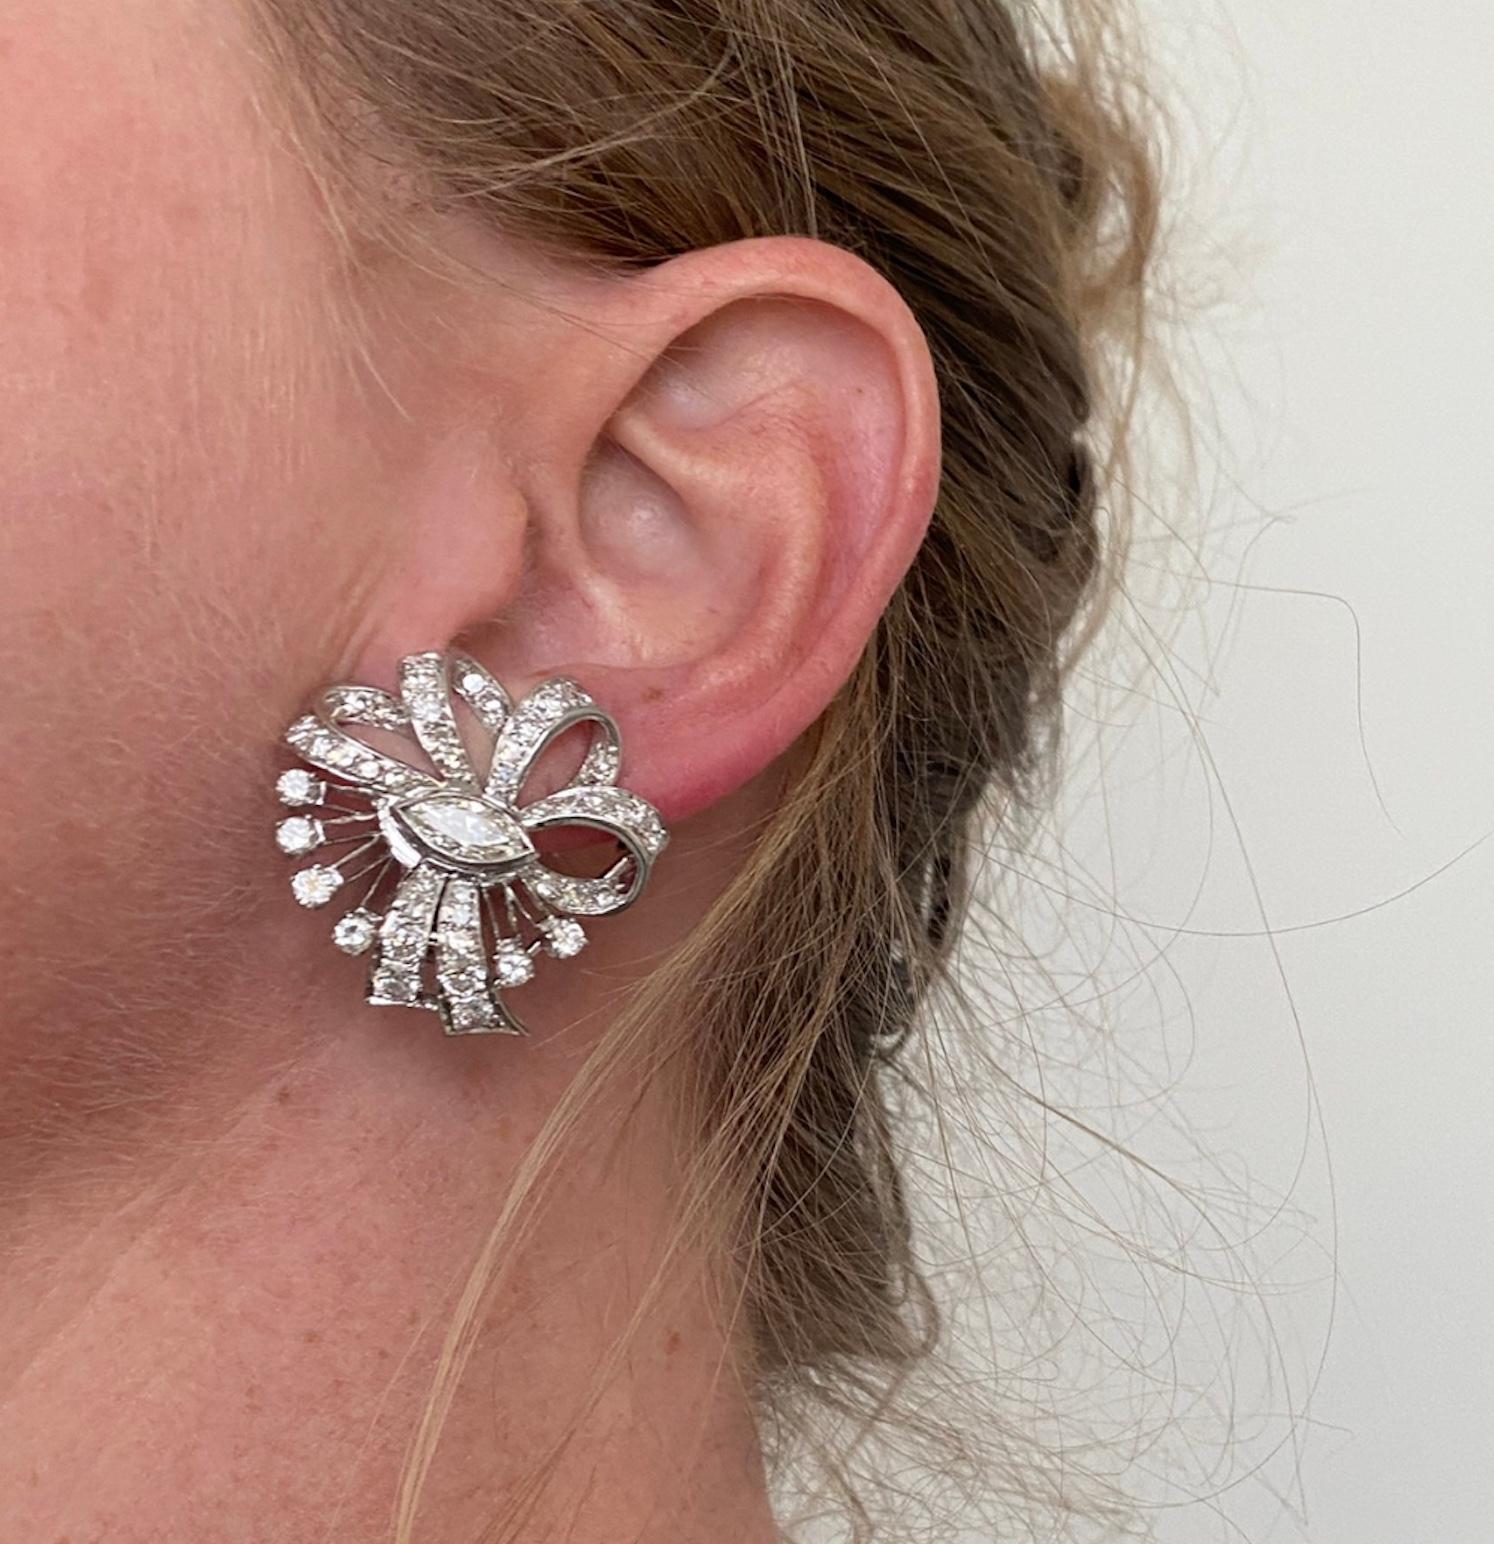 Edwardian, Cluster, Diamond Clip-on Earrings with Pin-Backs
Back of earrings both have attachment to turn earrings into a brooch or pin for lapel. Go from earrings to a pin with these stunning earrings. Perfect for those without pierced ears.